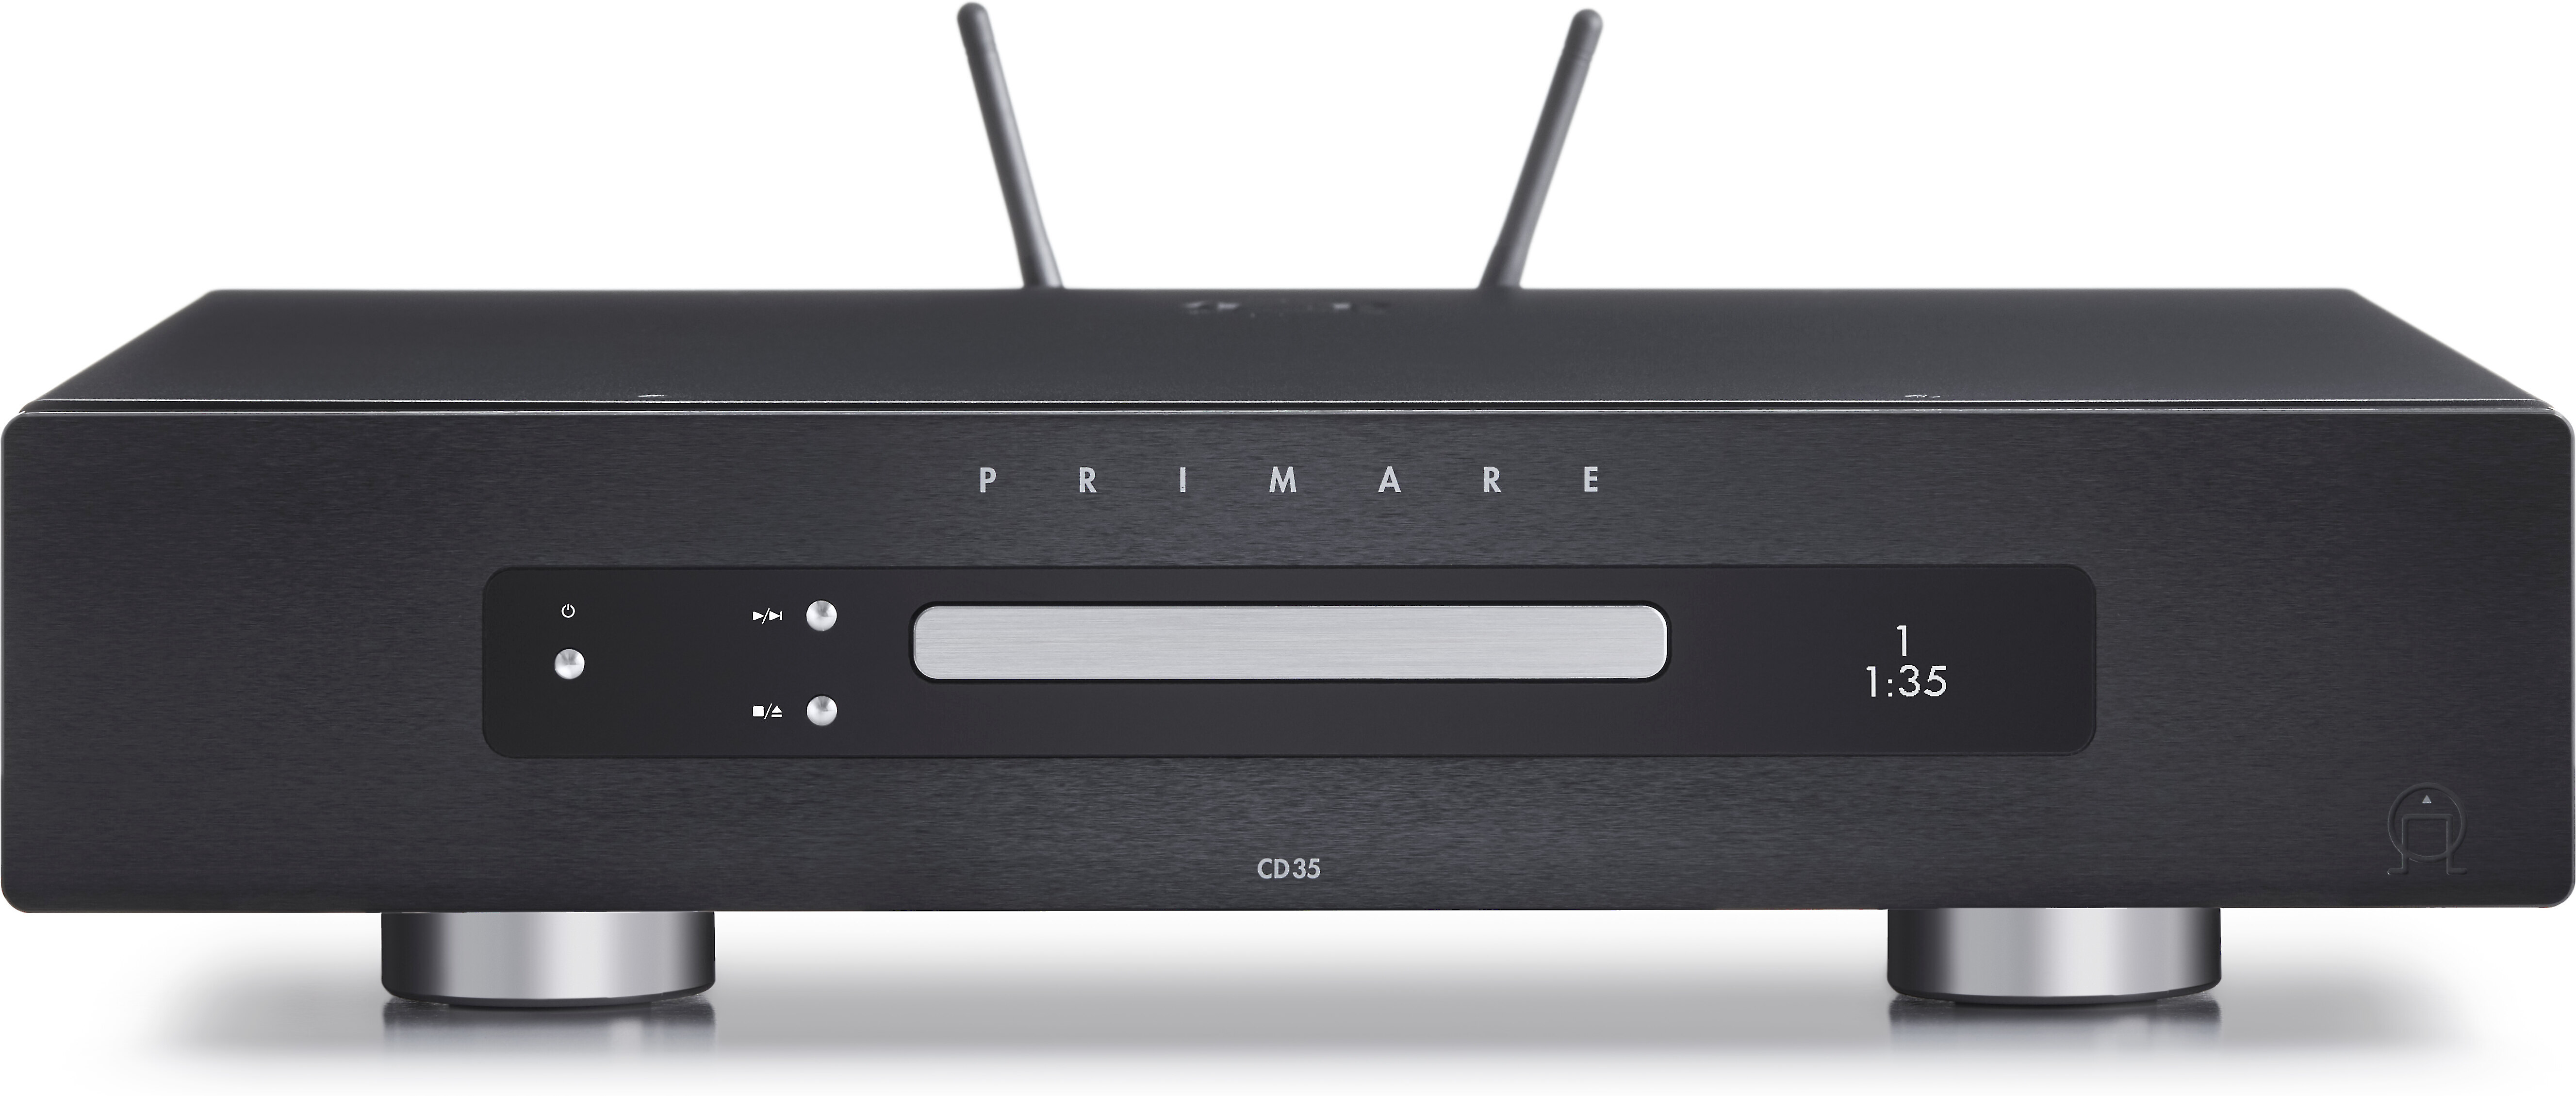 Customer Reviews: Primare CD35 Prisma (Black) CD player/DAC/network player  with Wi-Fi® and Bluetooth® at Crutchfield